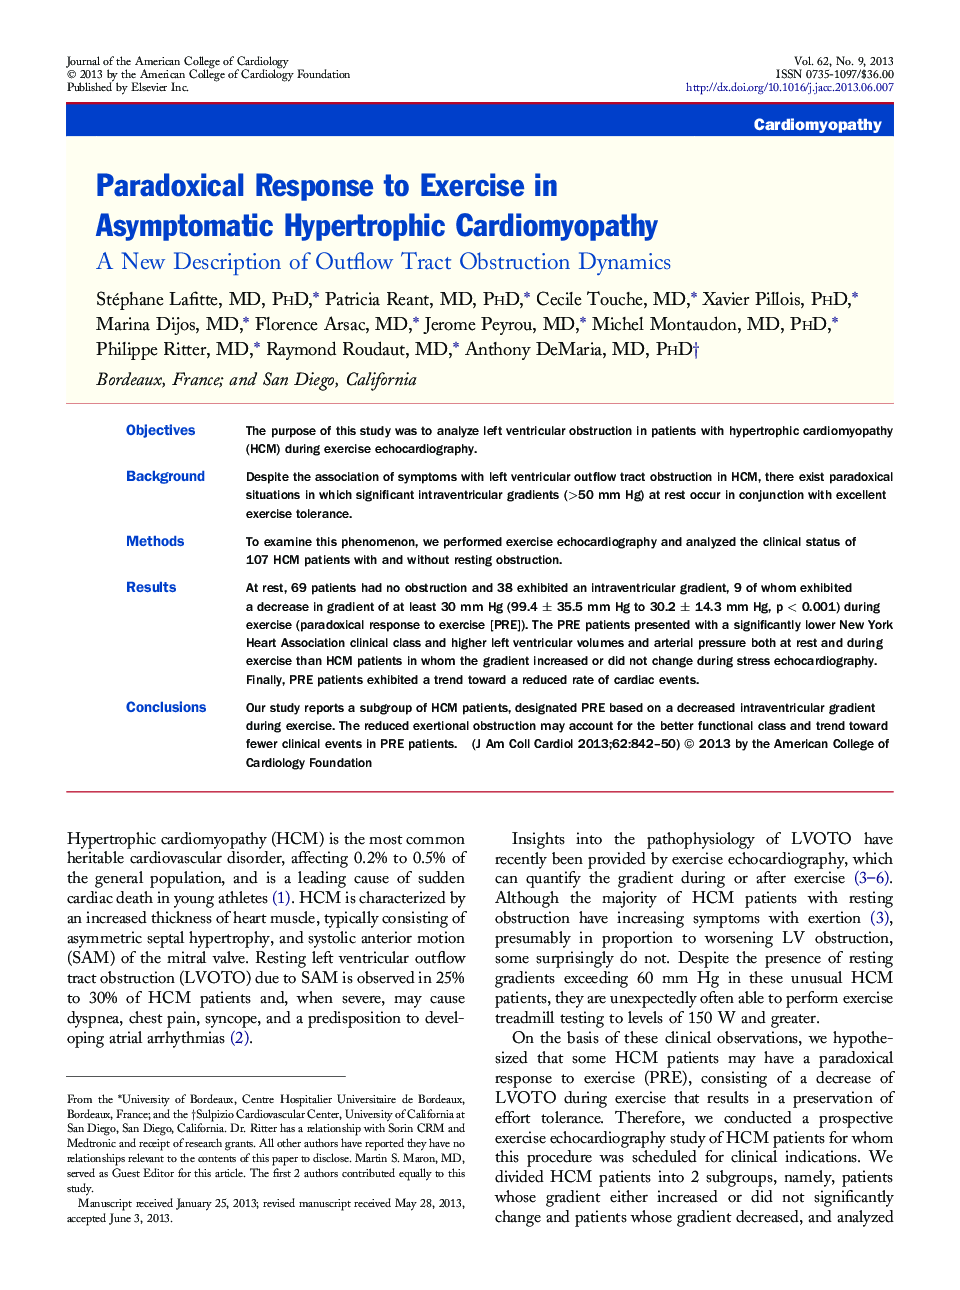 Paradoxical Response to Exercise in Asymptomatic Hypertrophic Cardiomyopathy : A New Description of Outflow Tract Obstruction Dynamics